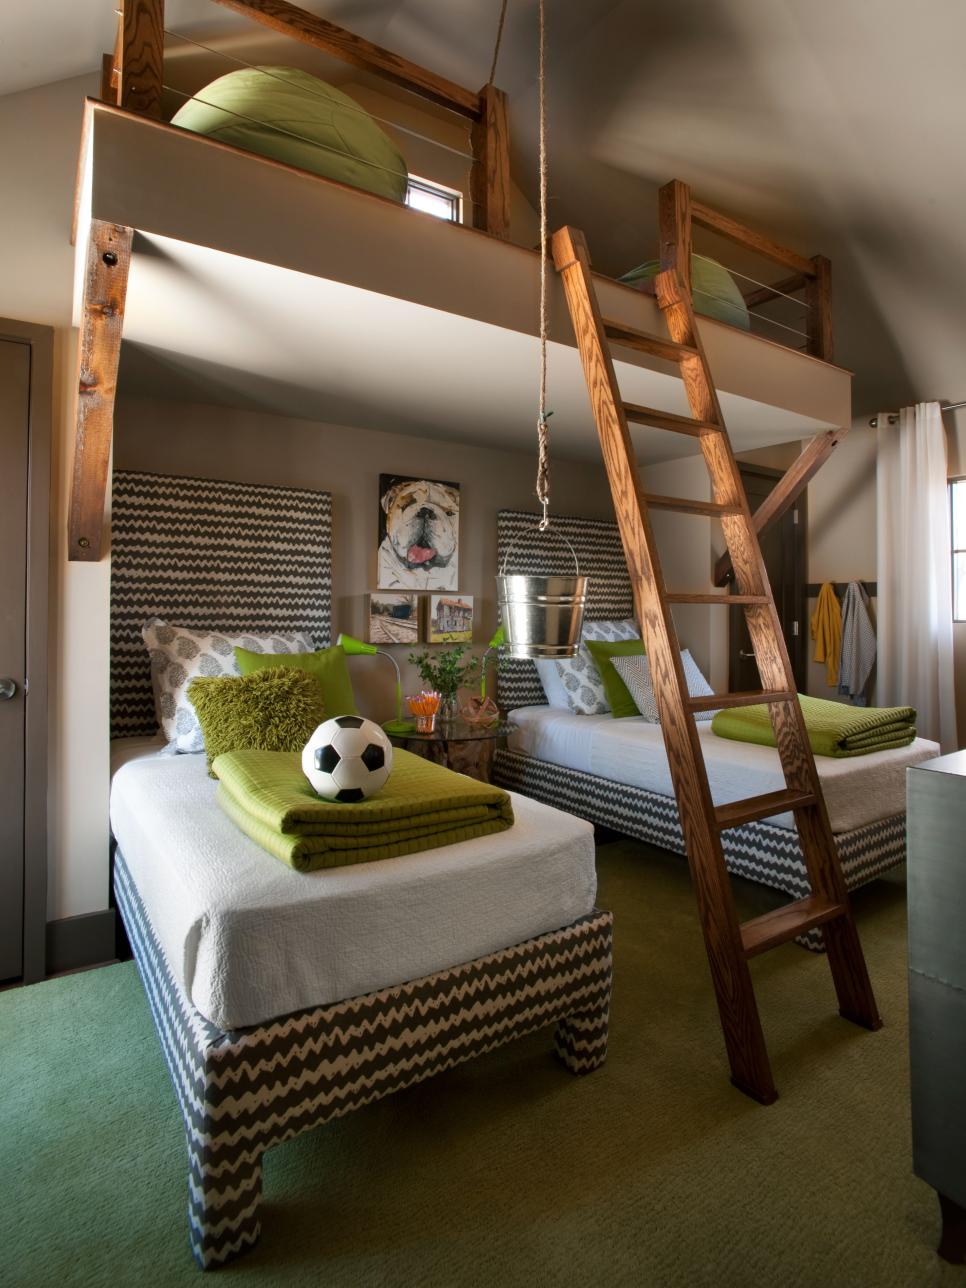 Rustic Kid's Bedroom With Twin Beds and Wood Ladder Leading to Loft